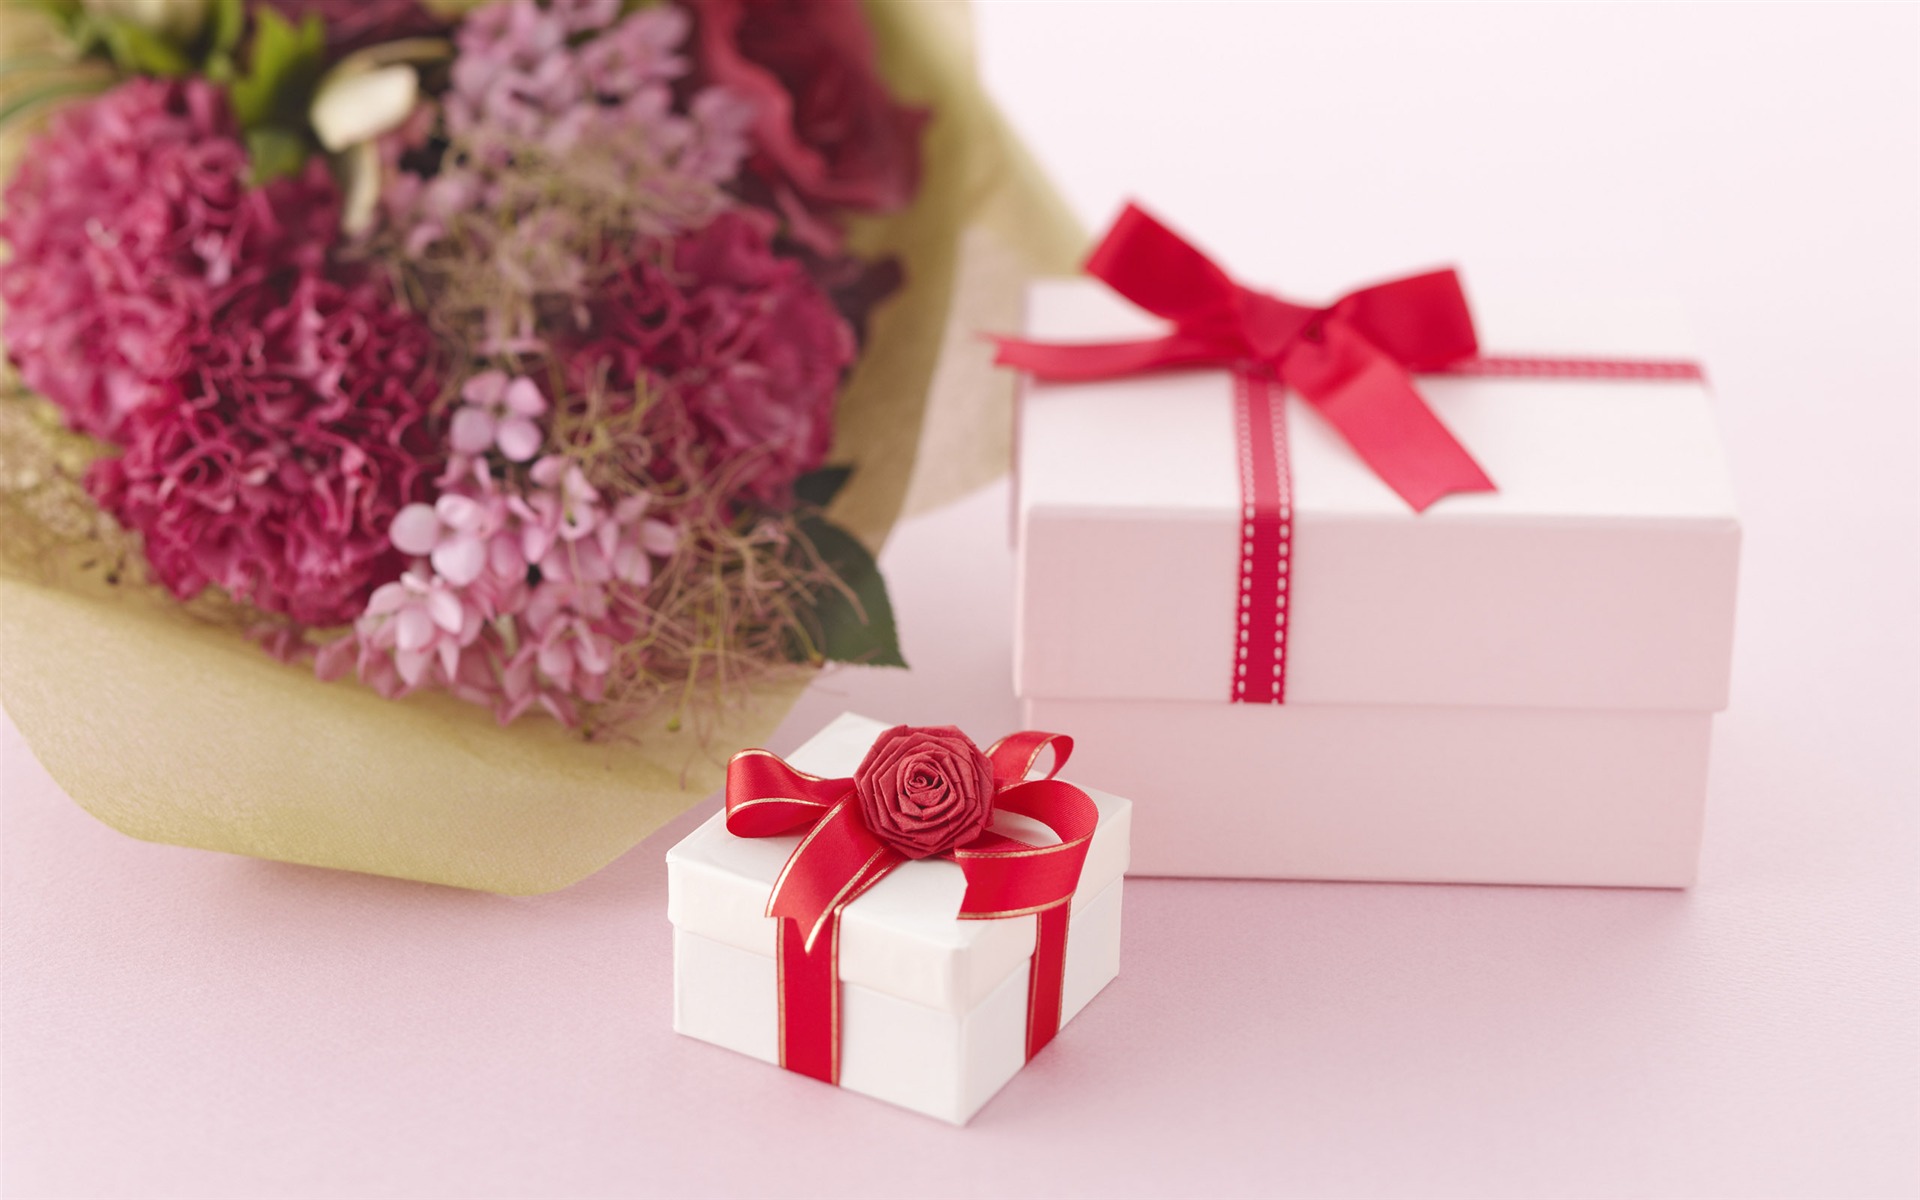 Flowers Gifts HD Wallpapers (1) #19 - 1920x1200